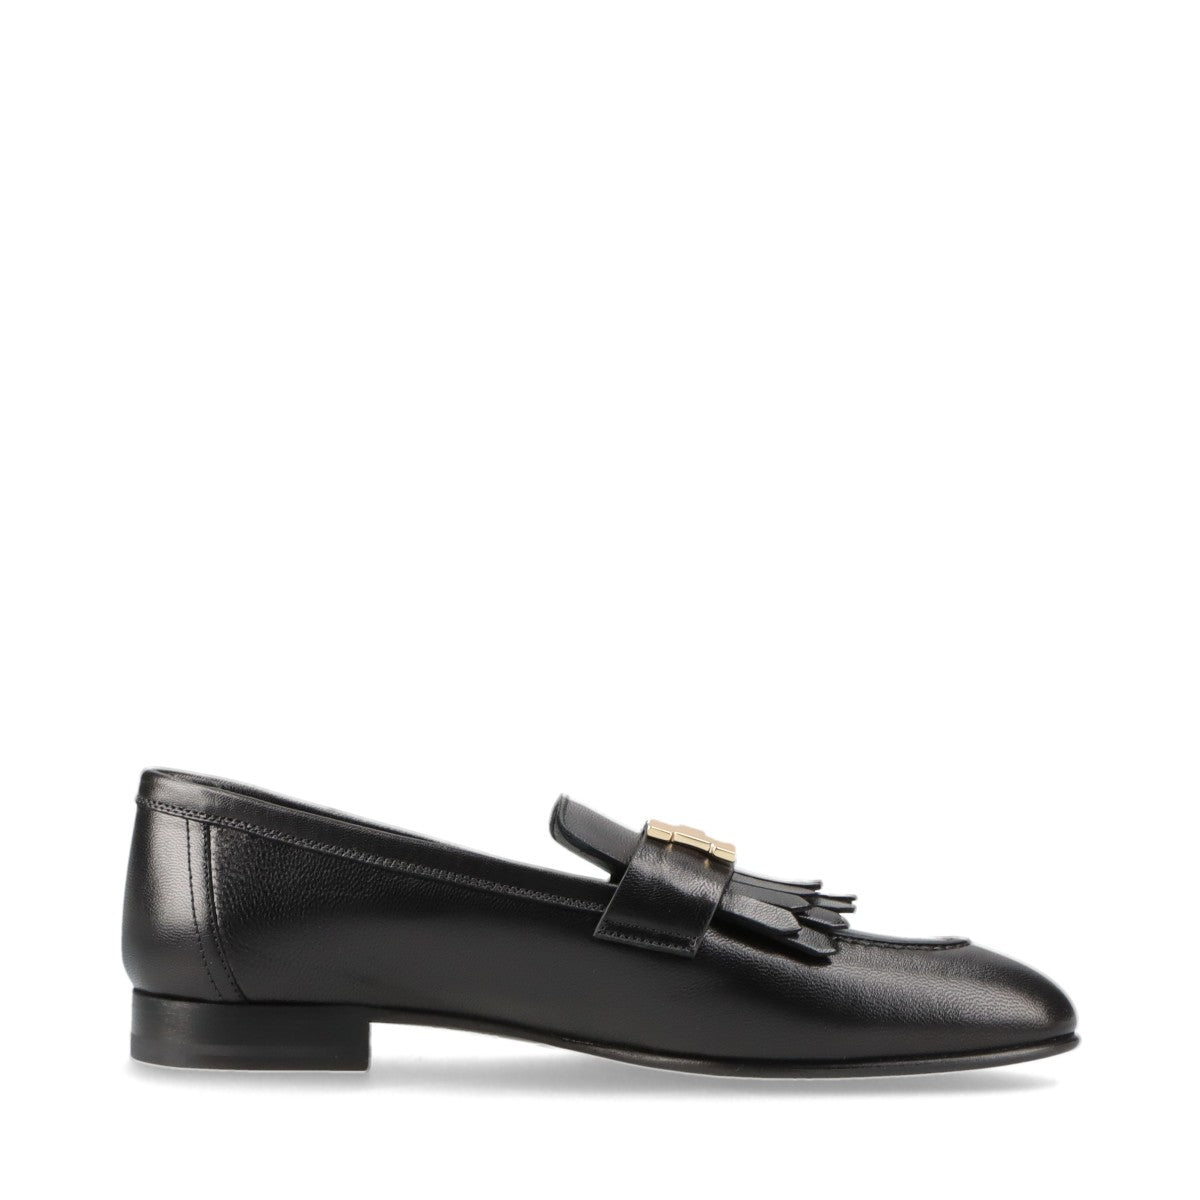 Hermès Royal Leather Loafer EU36 1/2 Ladies' Black Constance Fringe Box There is a bag